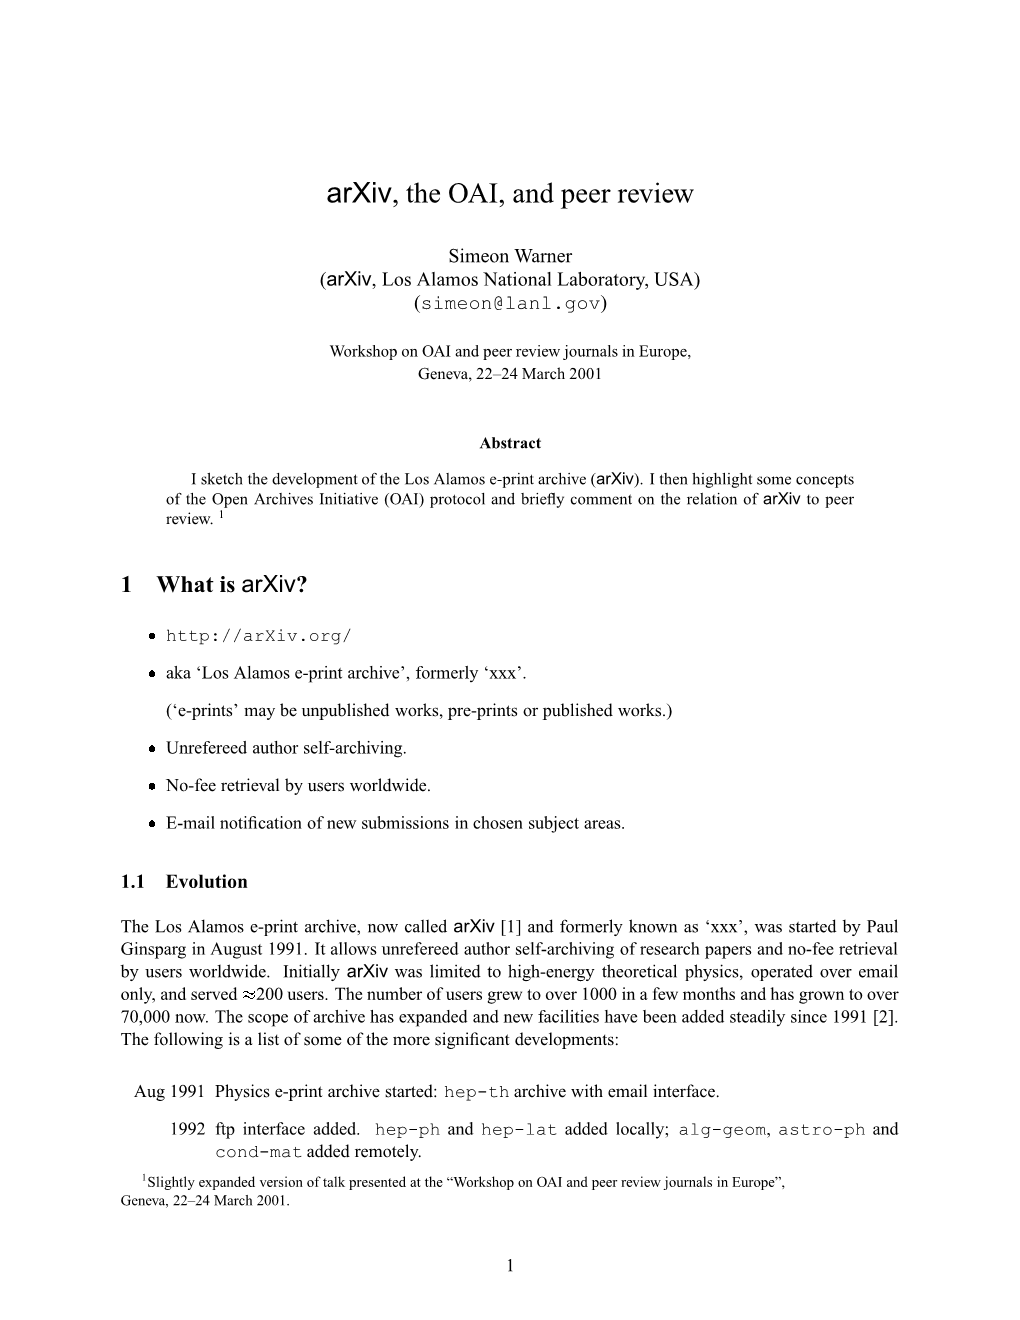 Arxiv, the OAI, and Peer Review